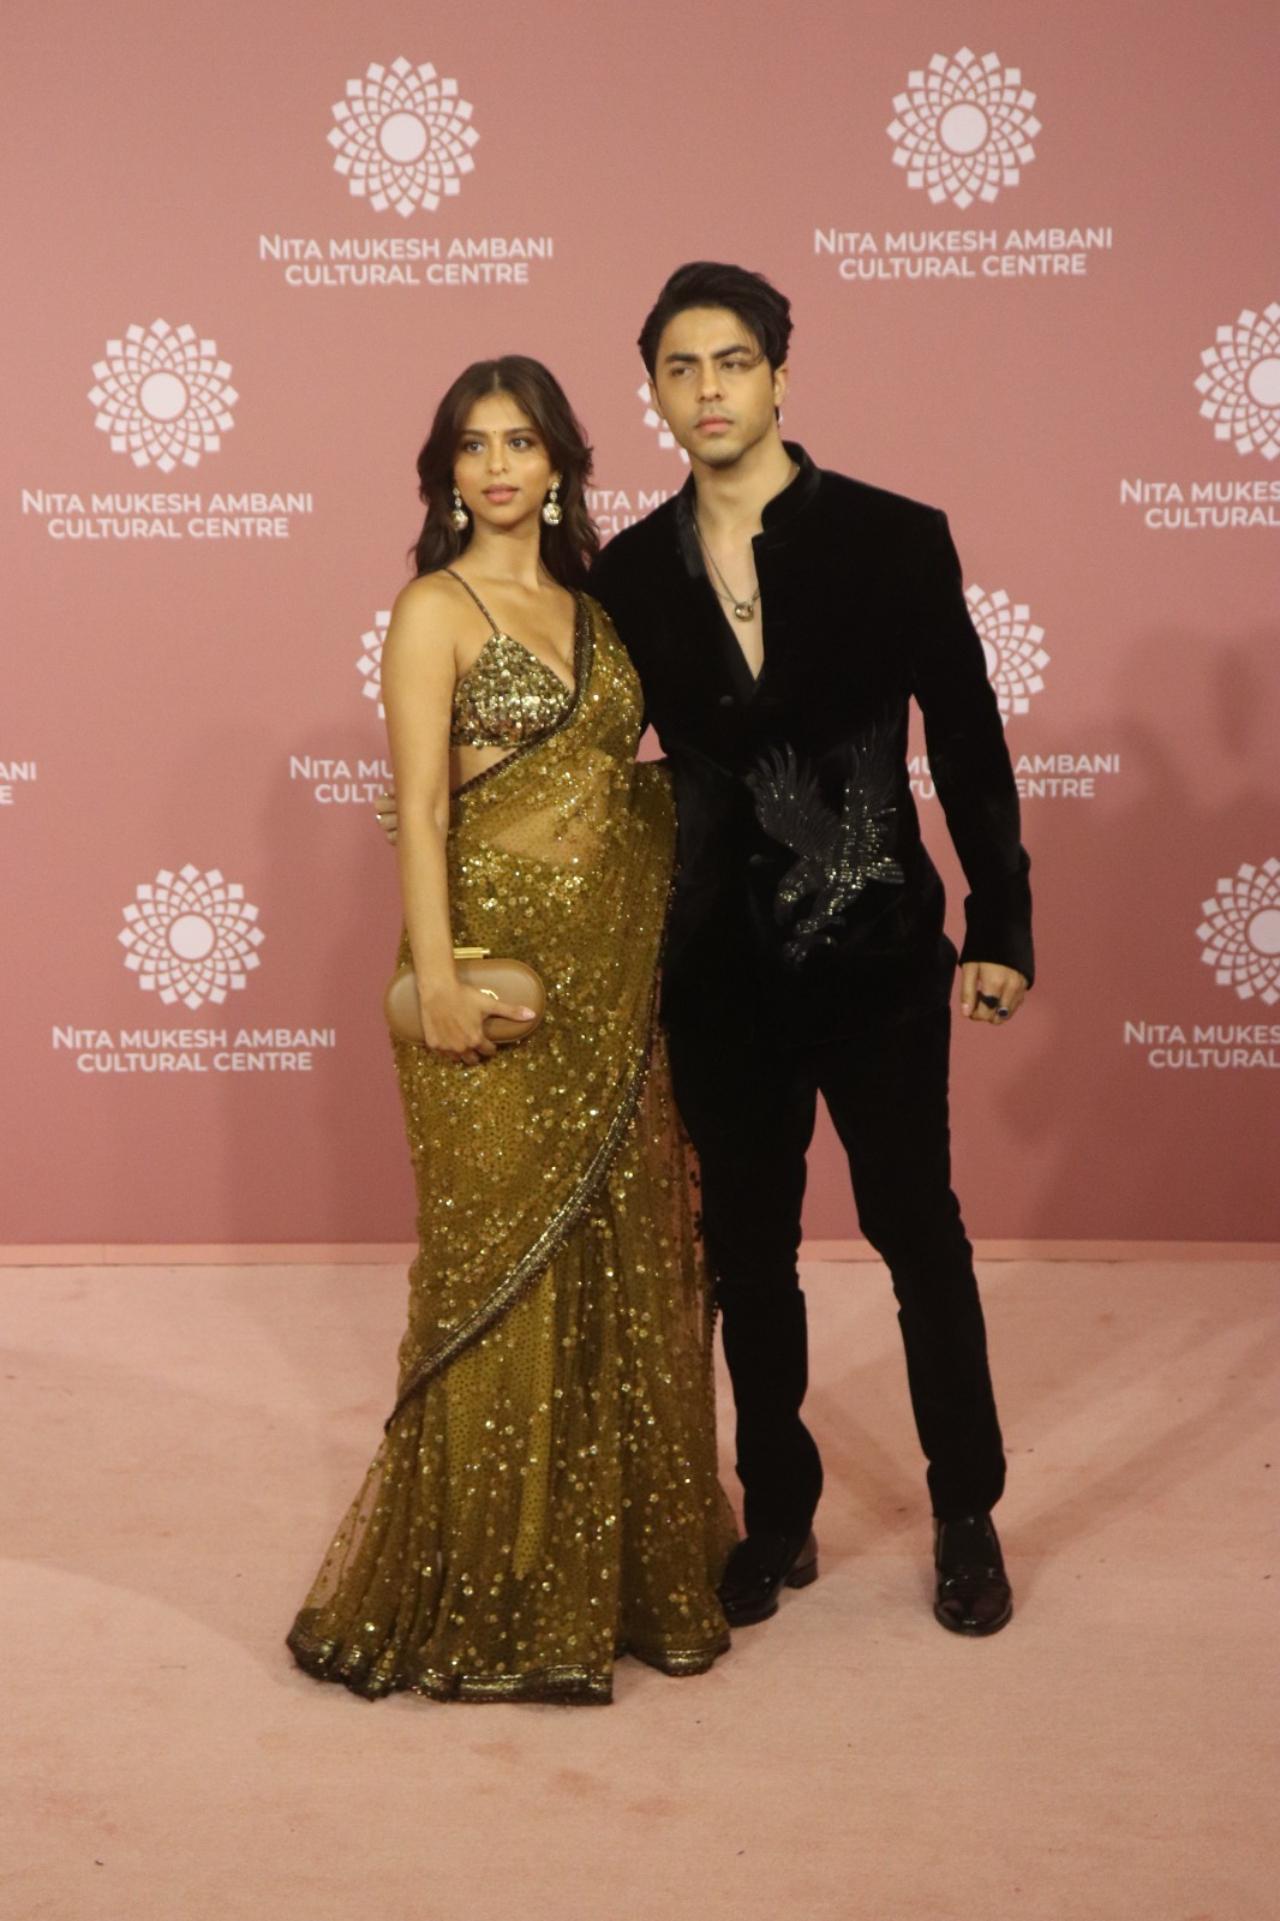 Siblings Suhana Khan and Aryan Khan arrived together for the pink carpet and struck a pose for the paparazzi. While Suhana made a striking appearance in an olive green glittery saree, Aryan kept is sleek in a black outfit